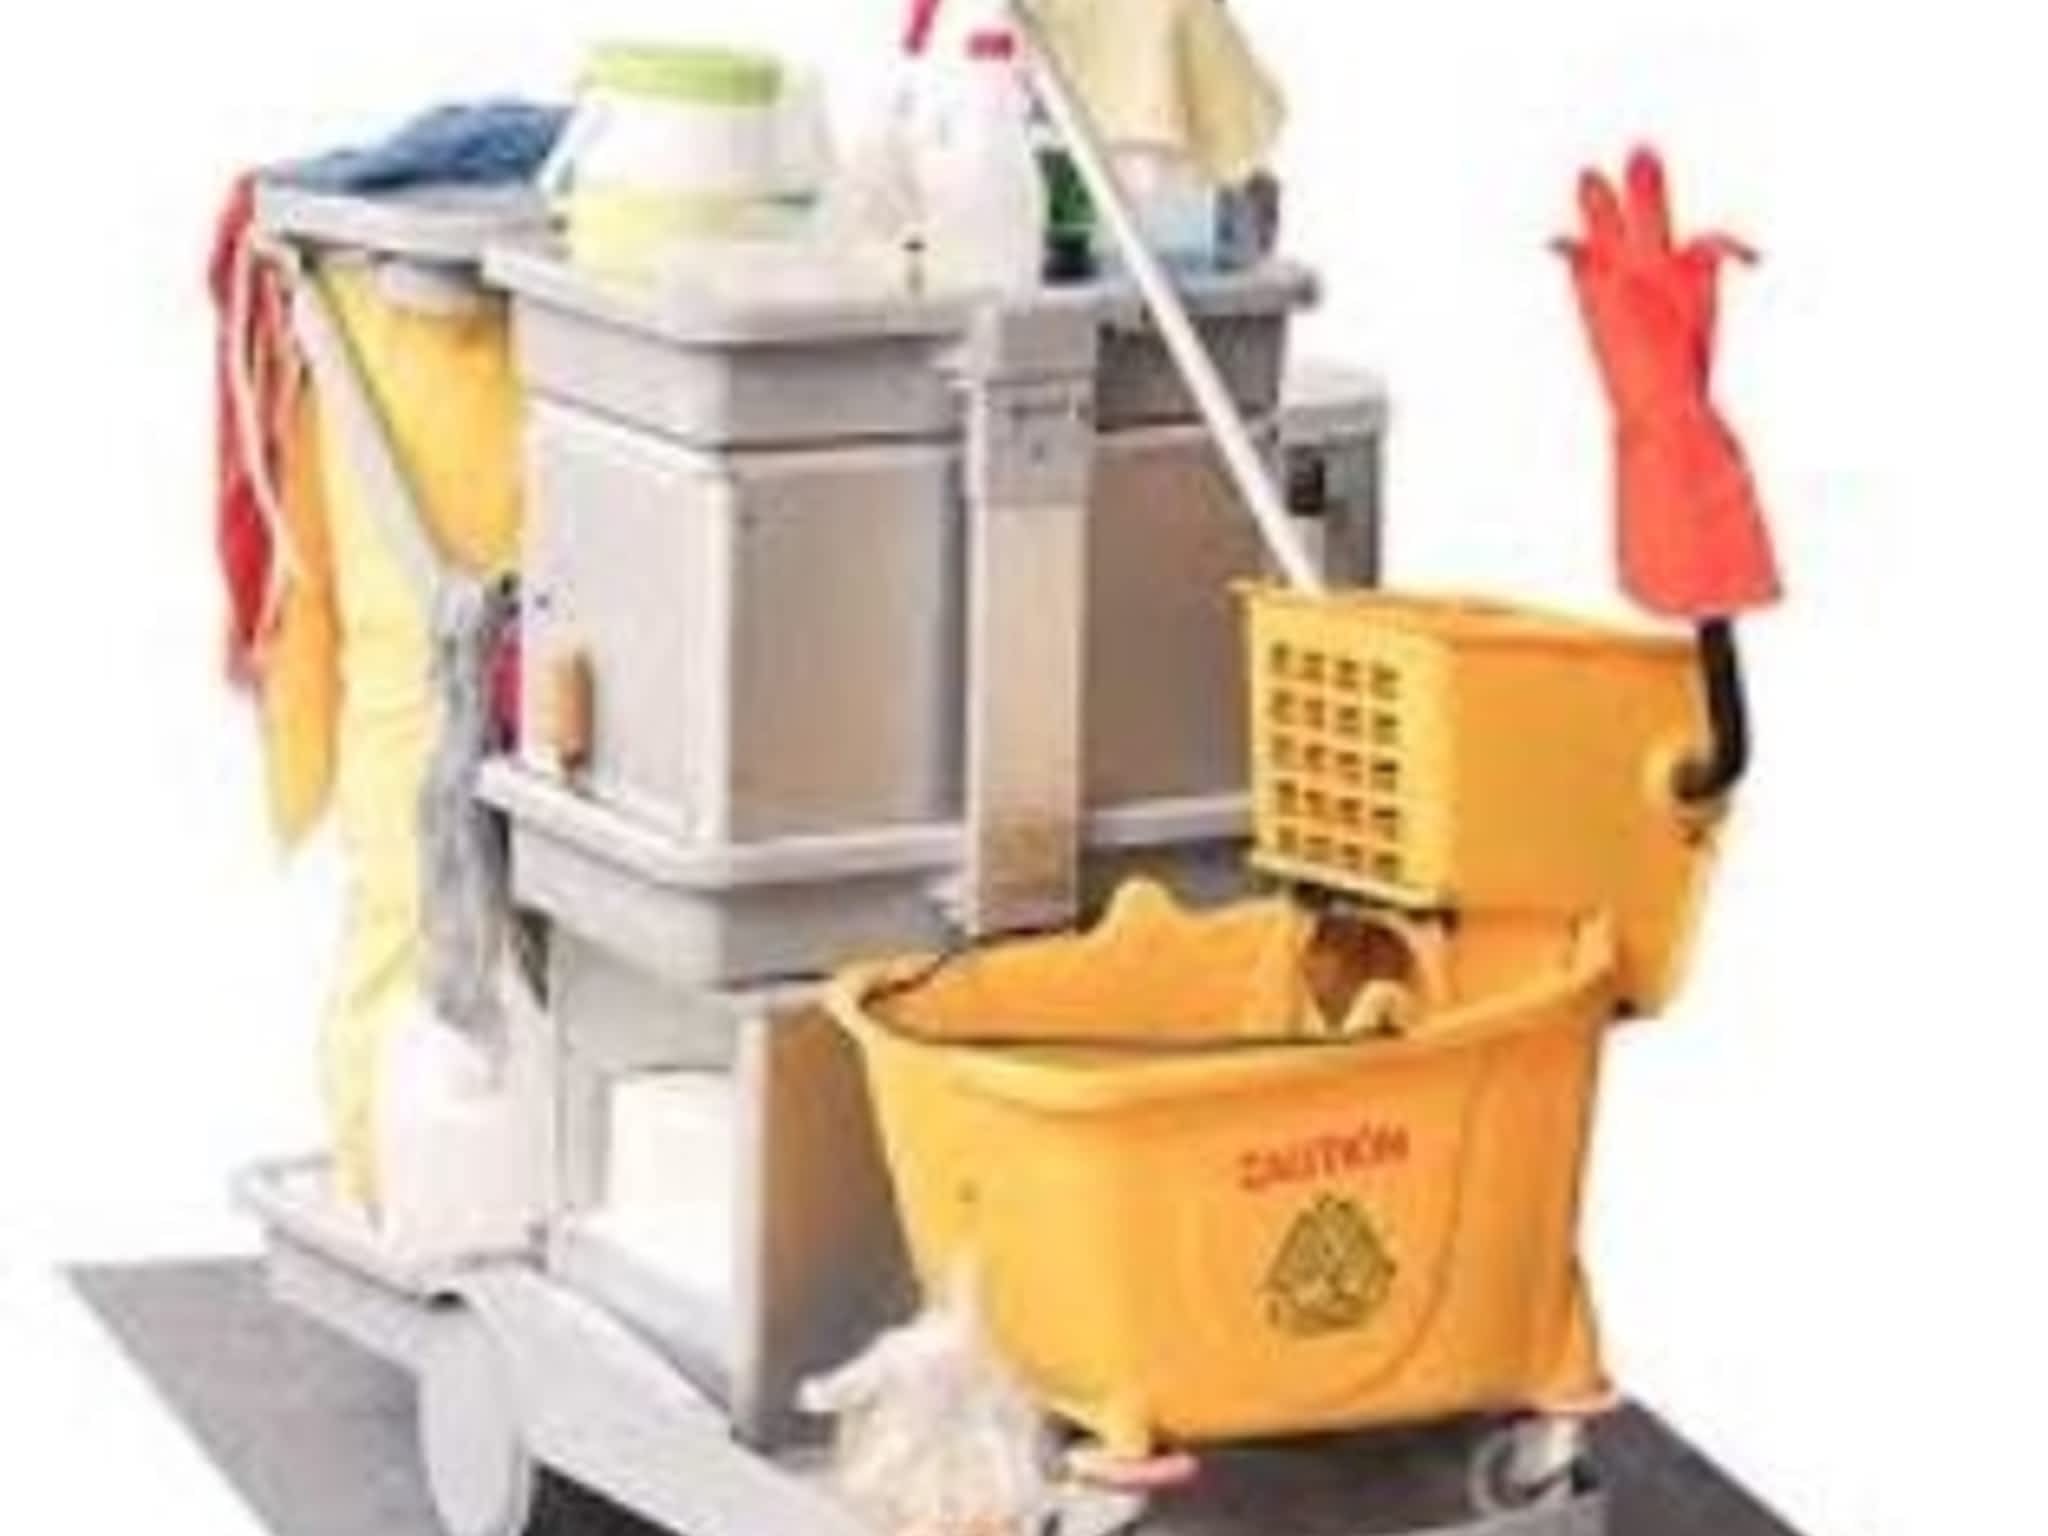 photo Mighty Clean Janitorial Services